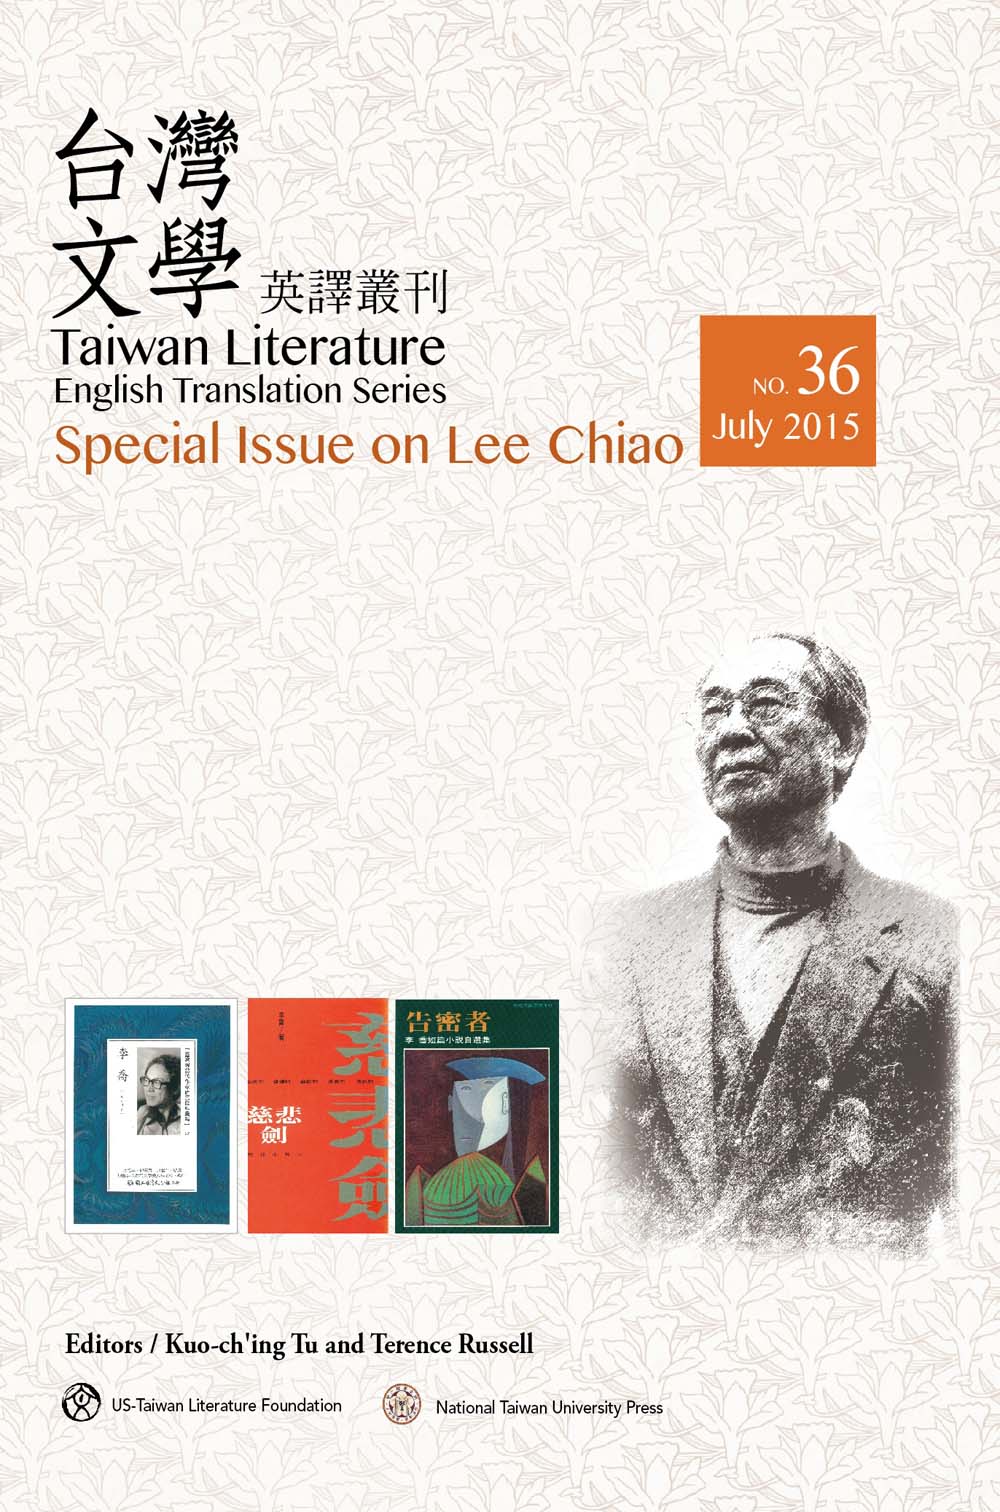 Taiwan Literature: English Translation Series, No. 36 (Special Issue on Lee Chiao)